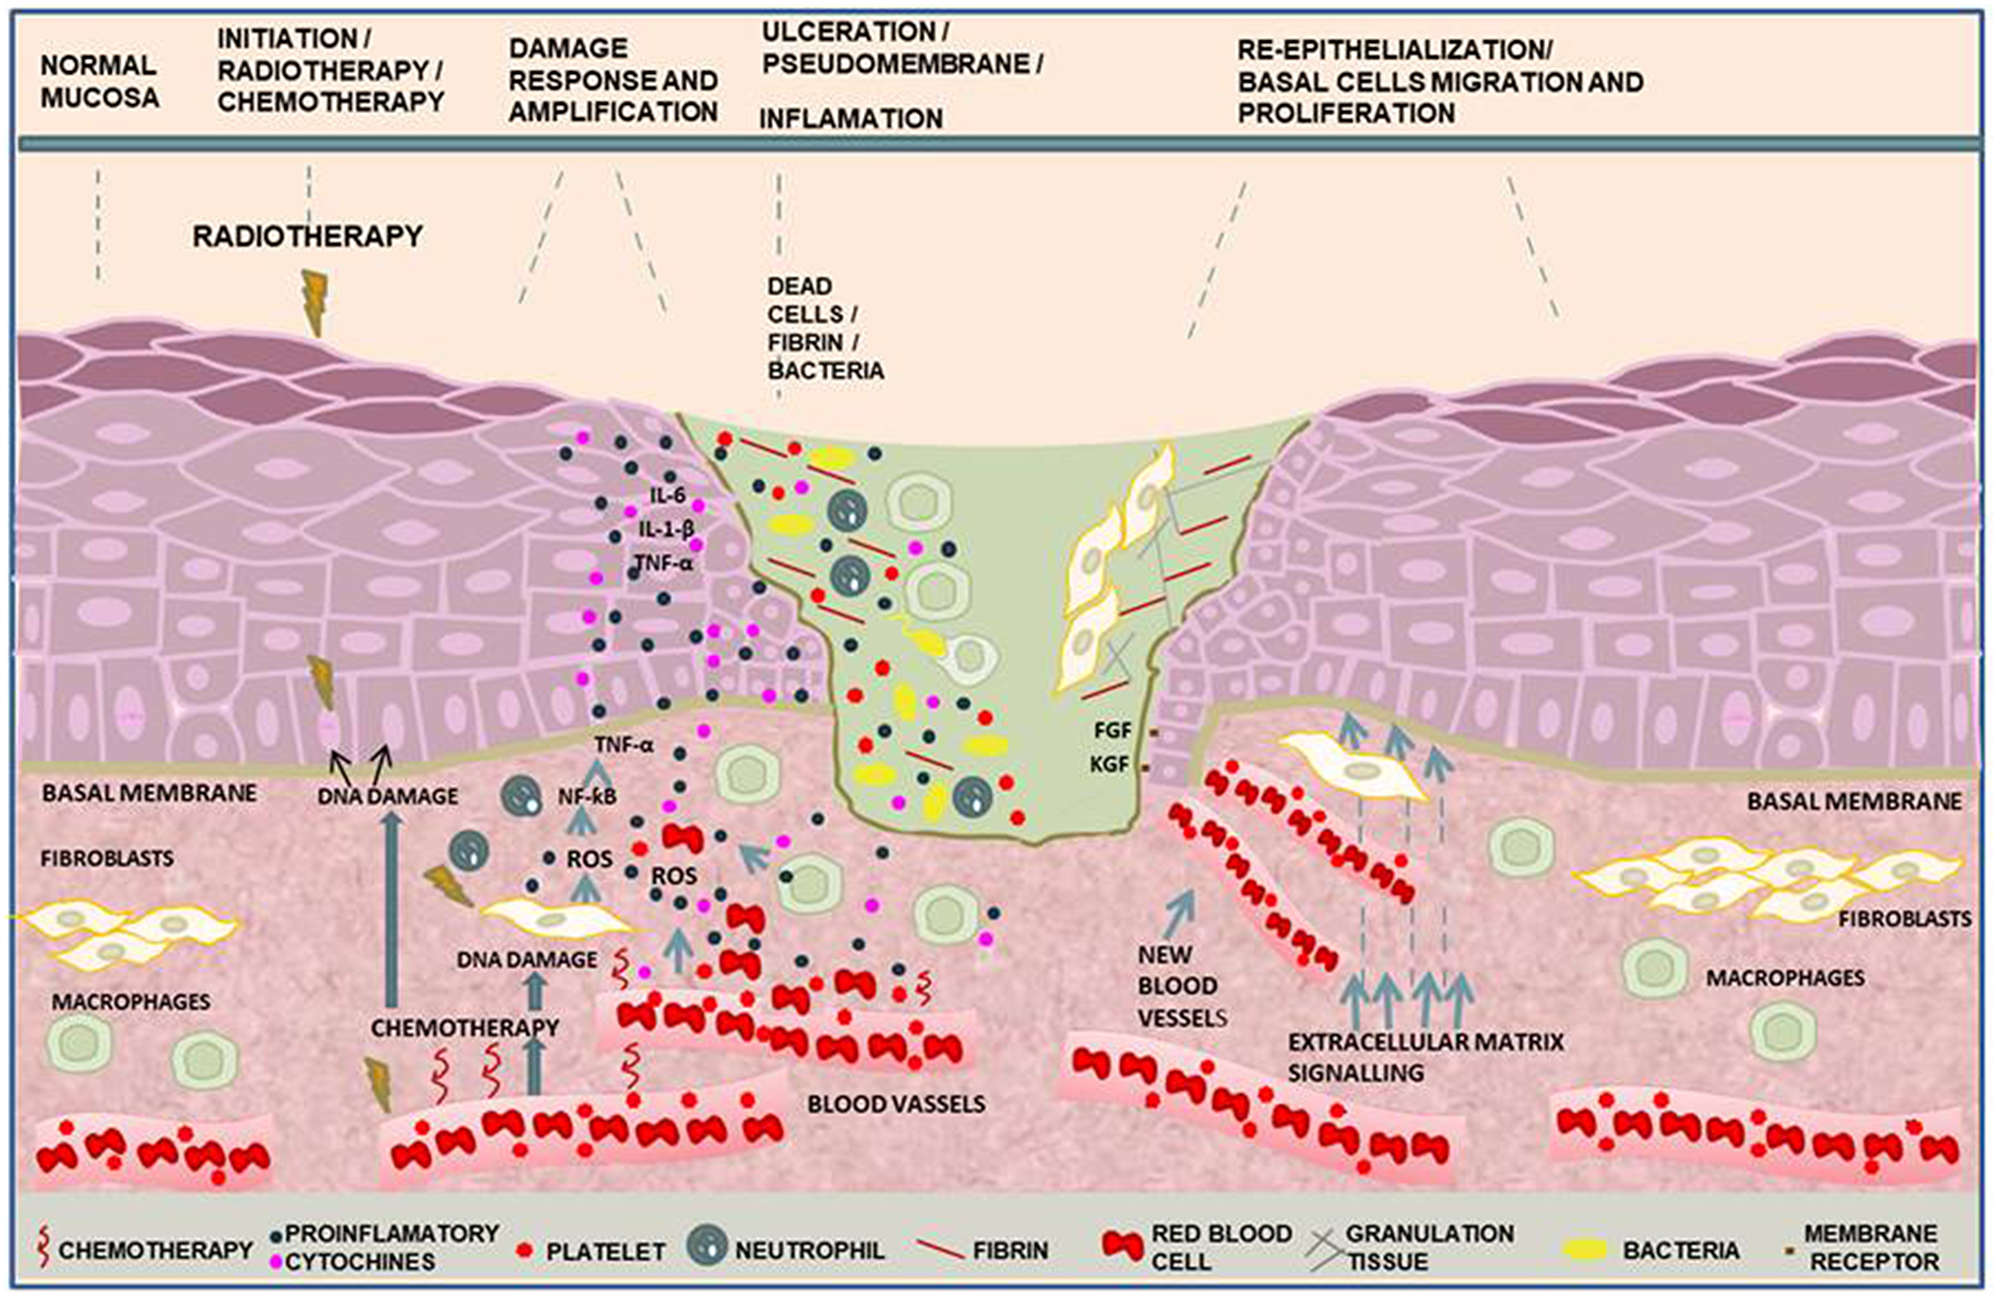 Molecular pathways in the phases of oral mucositis induced by cancer therapy.